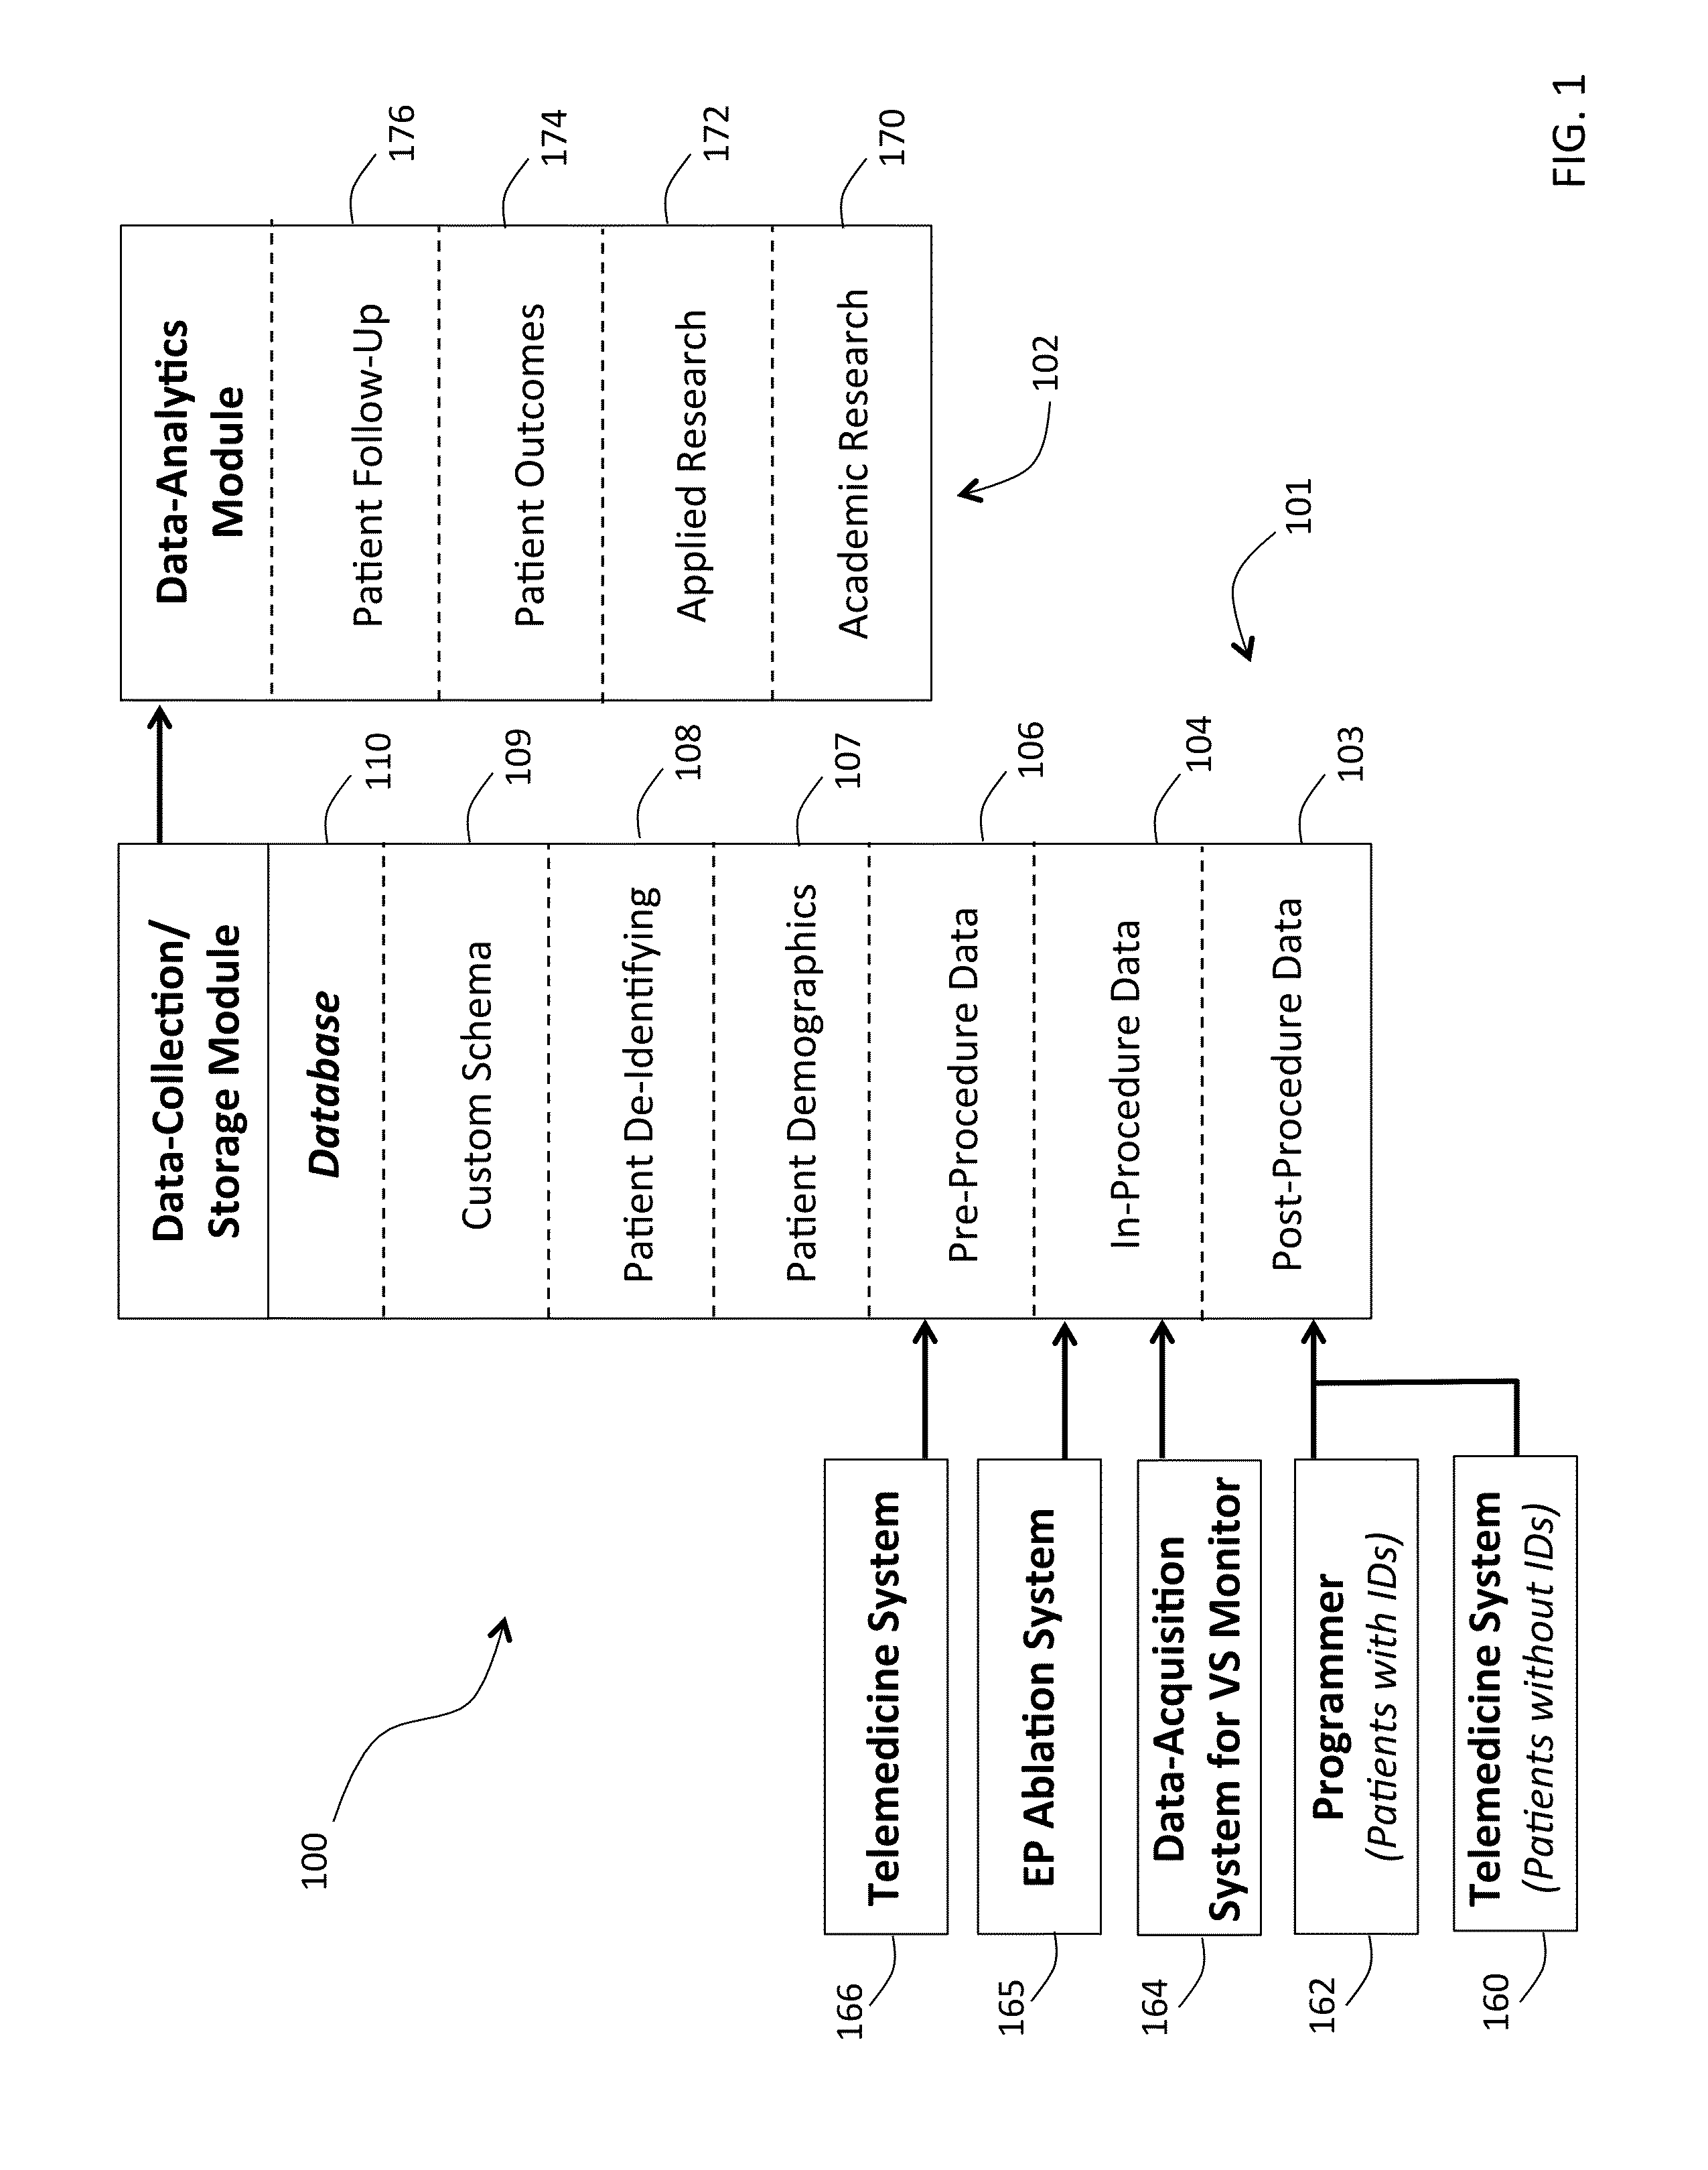 Internet-based system for collecting and analyzing data before, during, and after a cardiovascular procedure